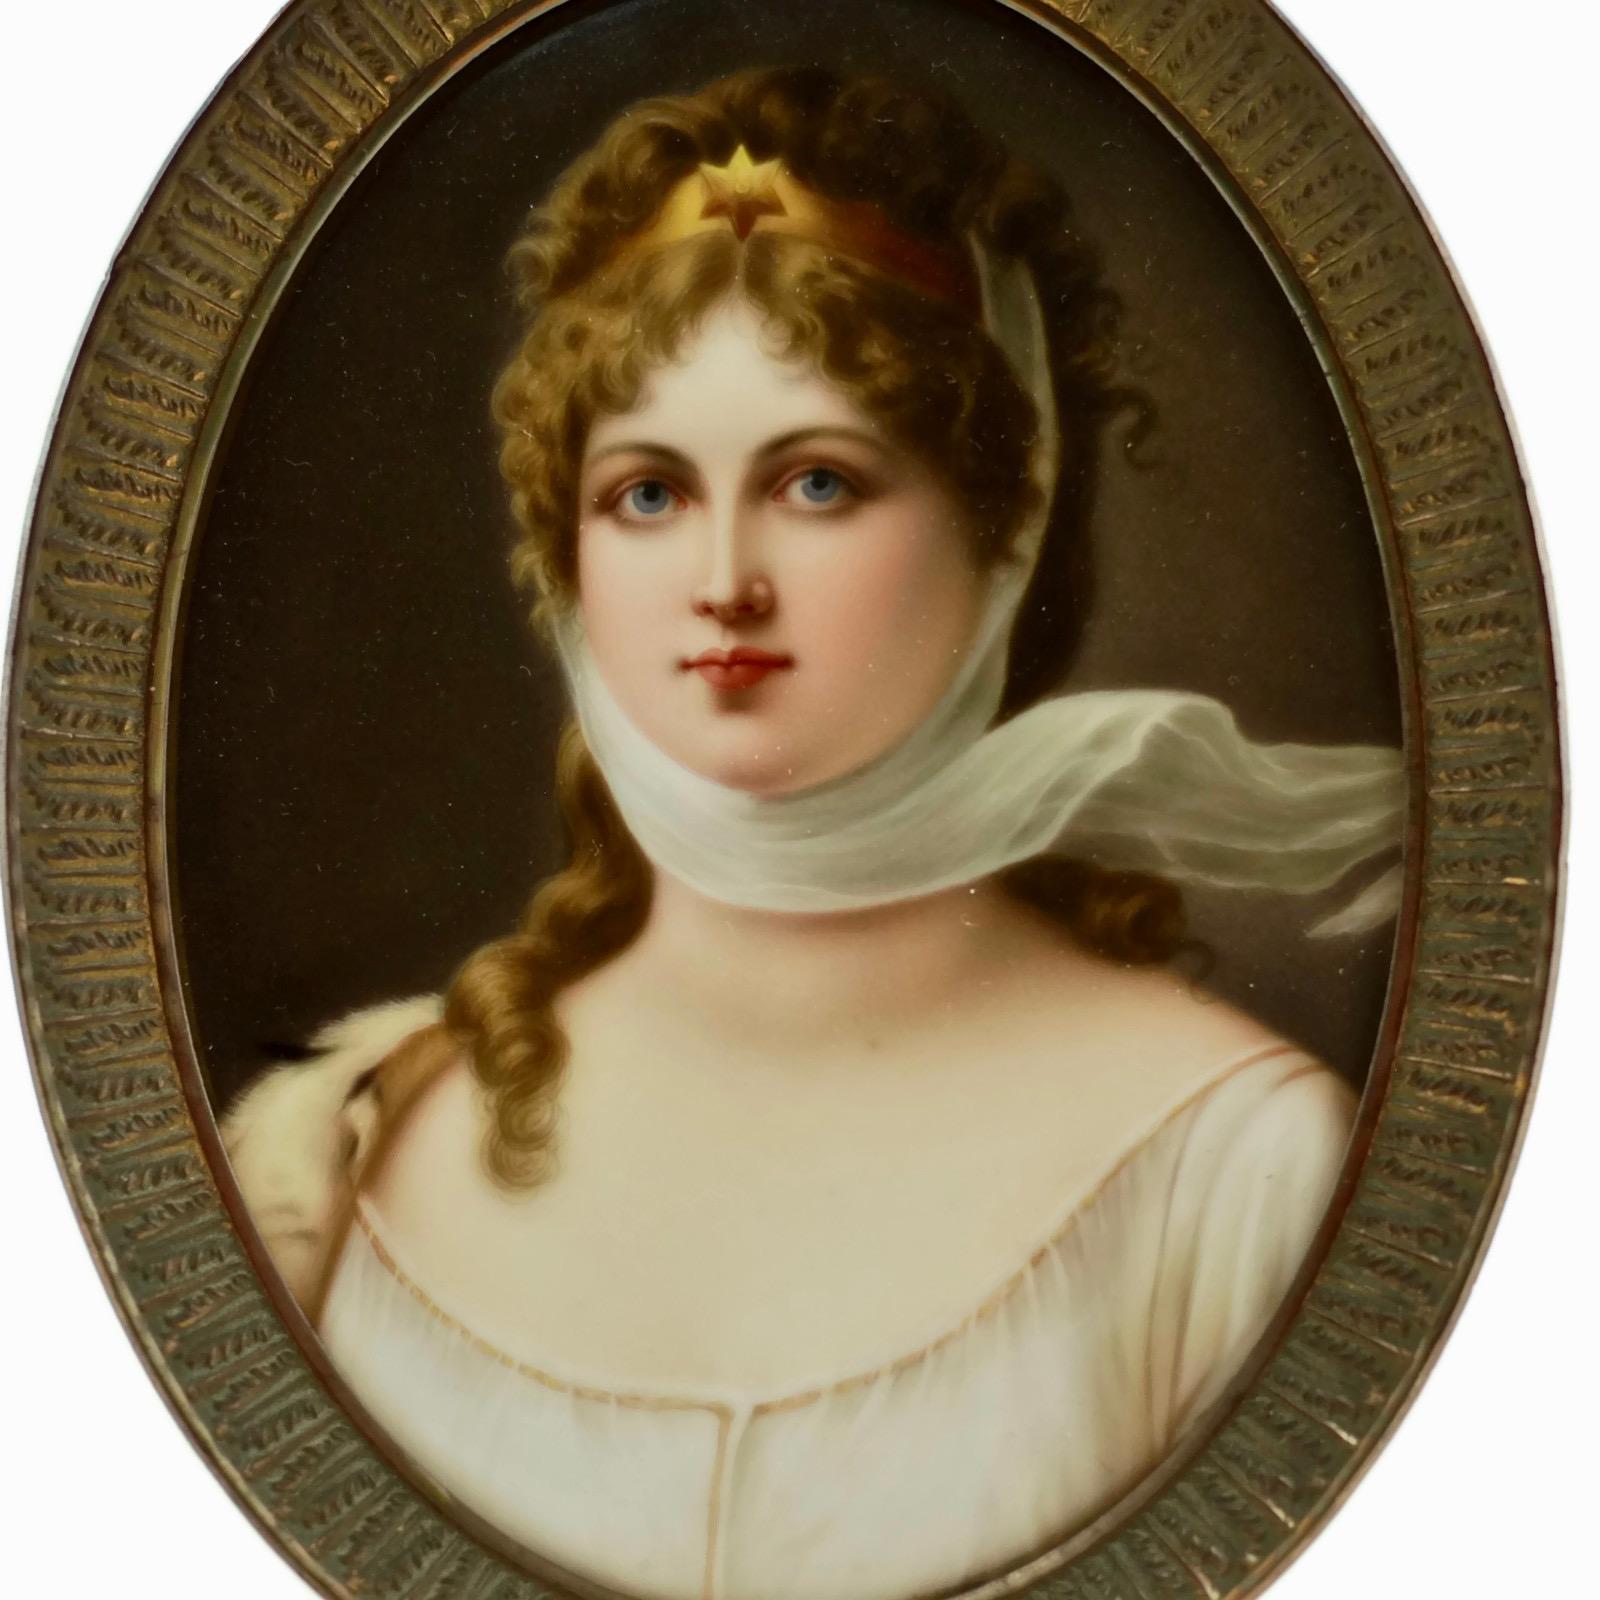 This 19th century Hutschenreuther oval porcelain plaque was hand painted by Wagner and features the image of Queen Louisa of Prussia after the work by Germain artist Gustav Karl Richter. As seen in the accompanying photographs, the artwork has been